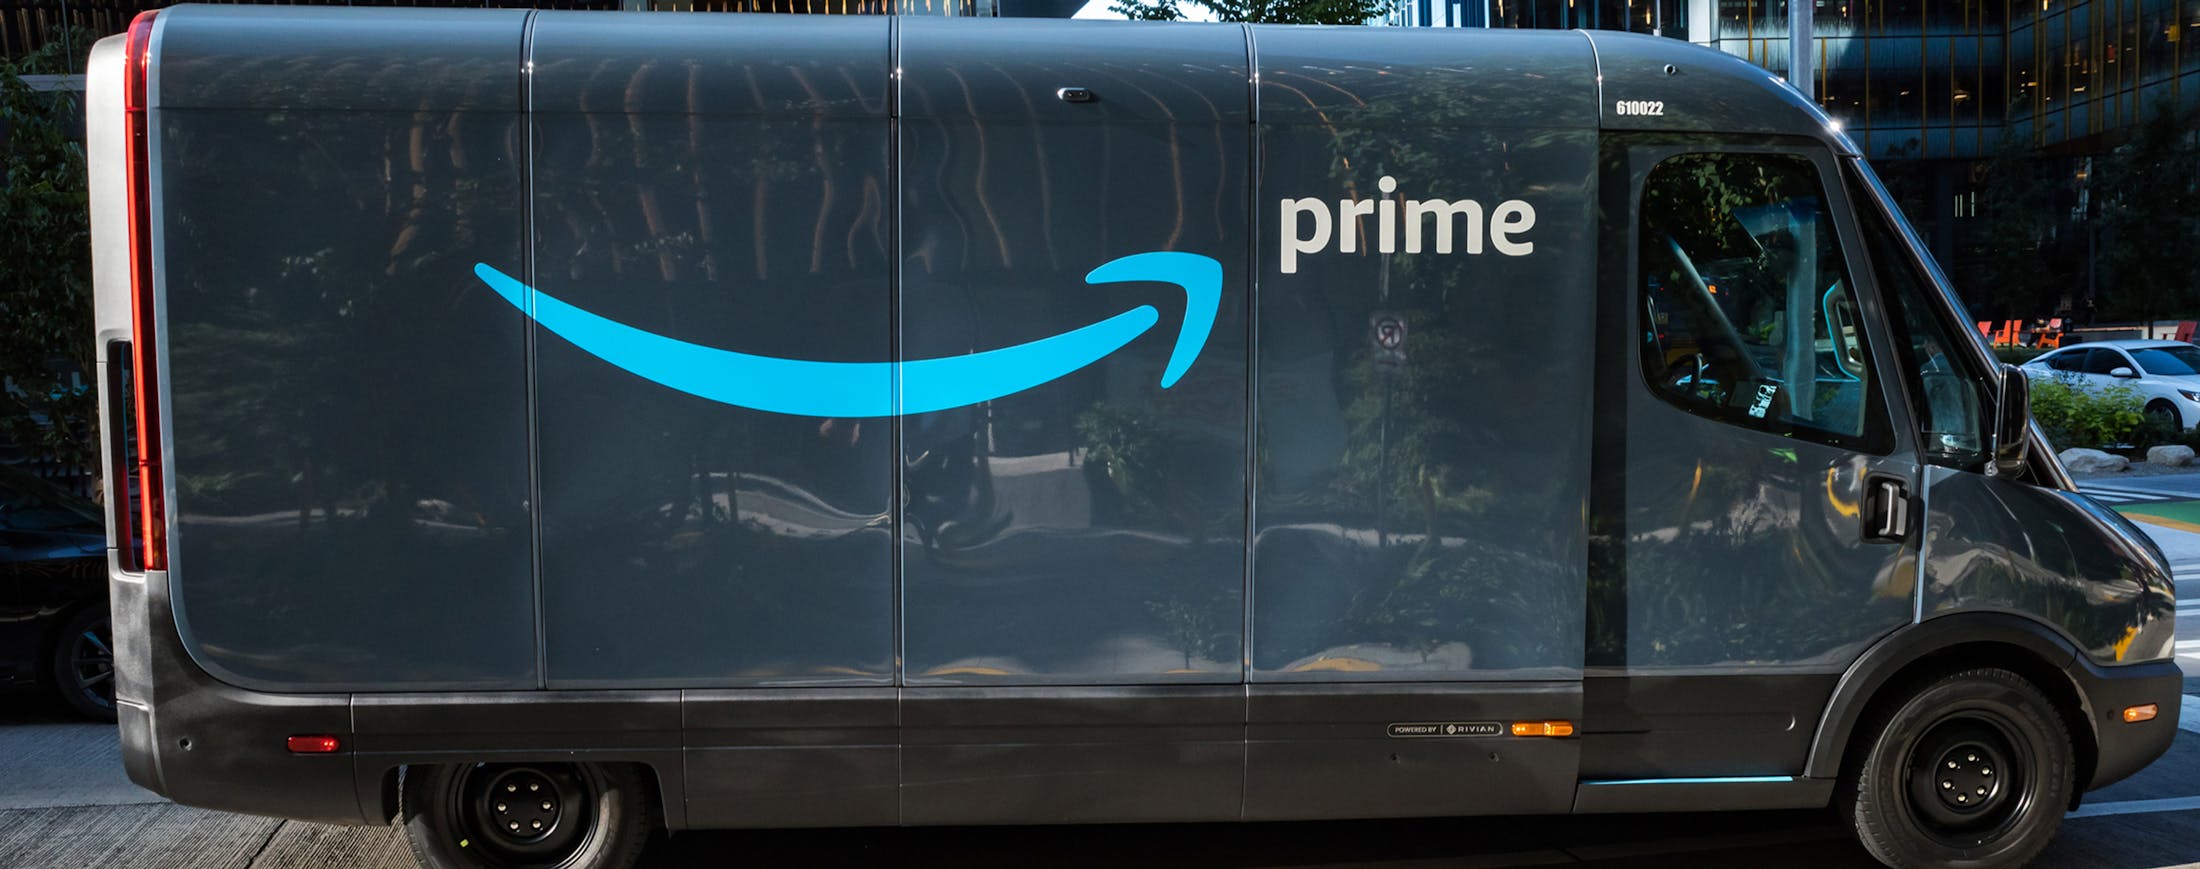 Amazon Delivery Truck - Banner